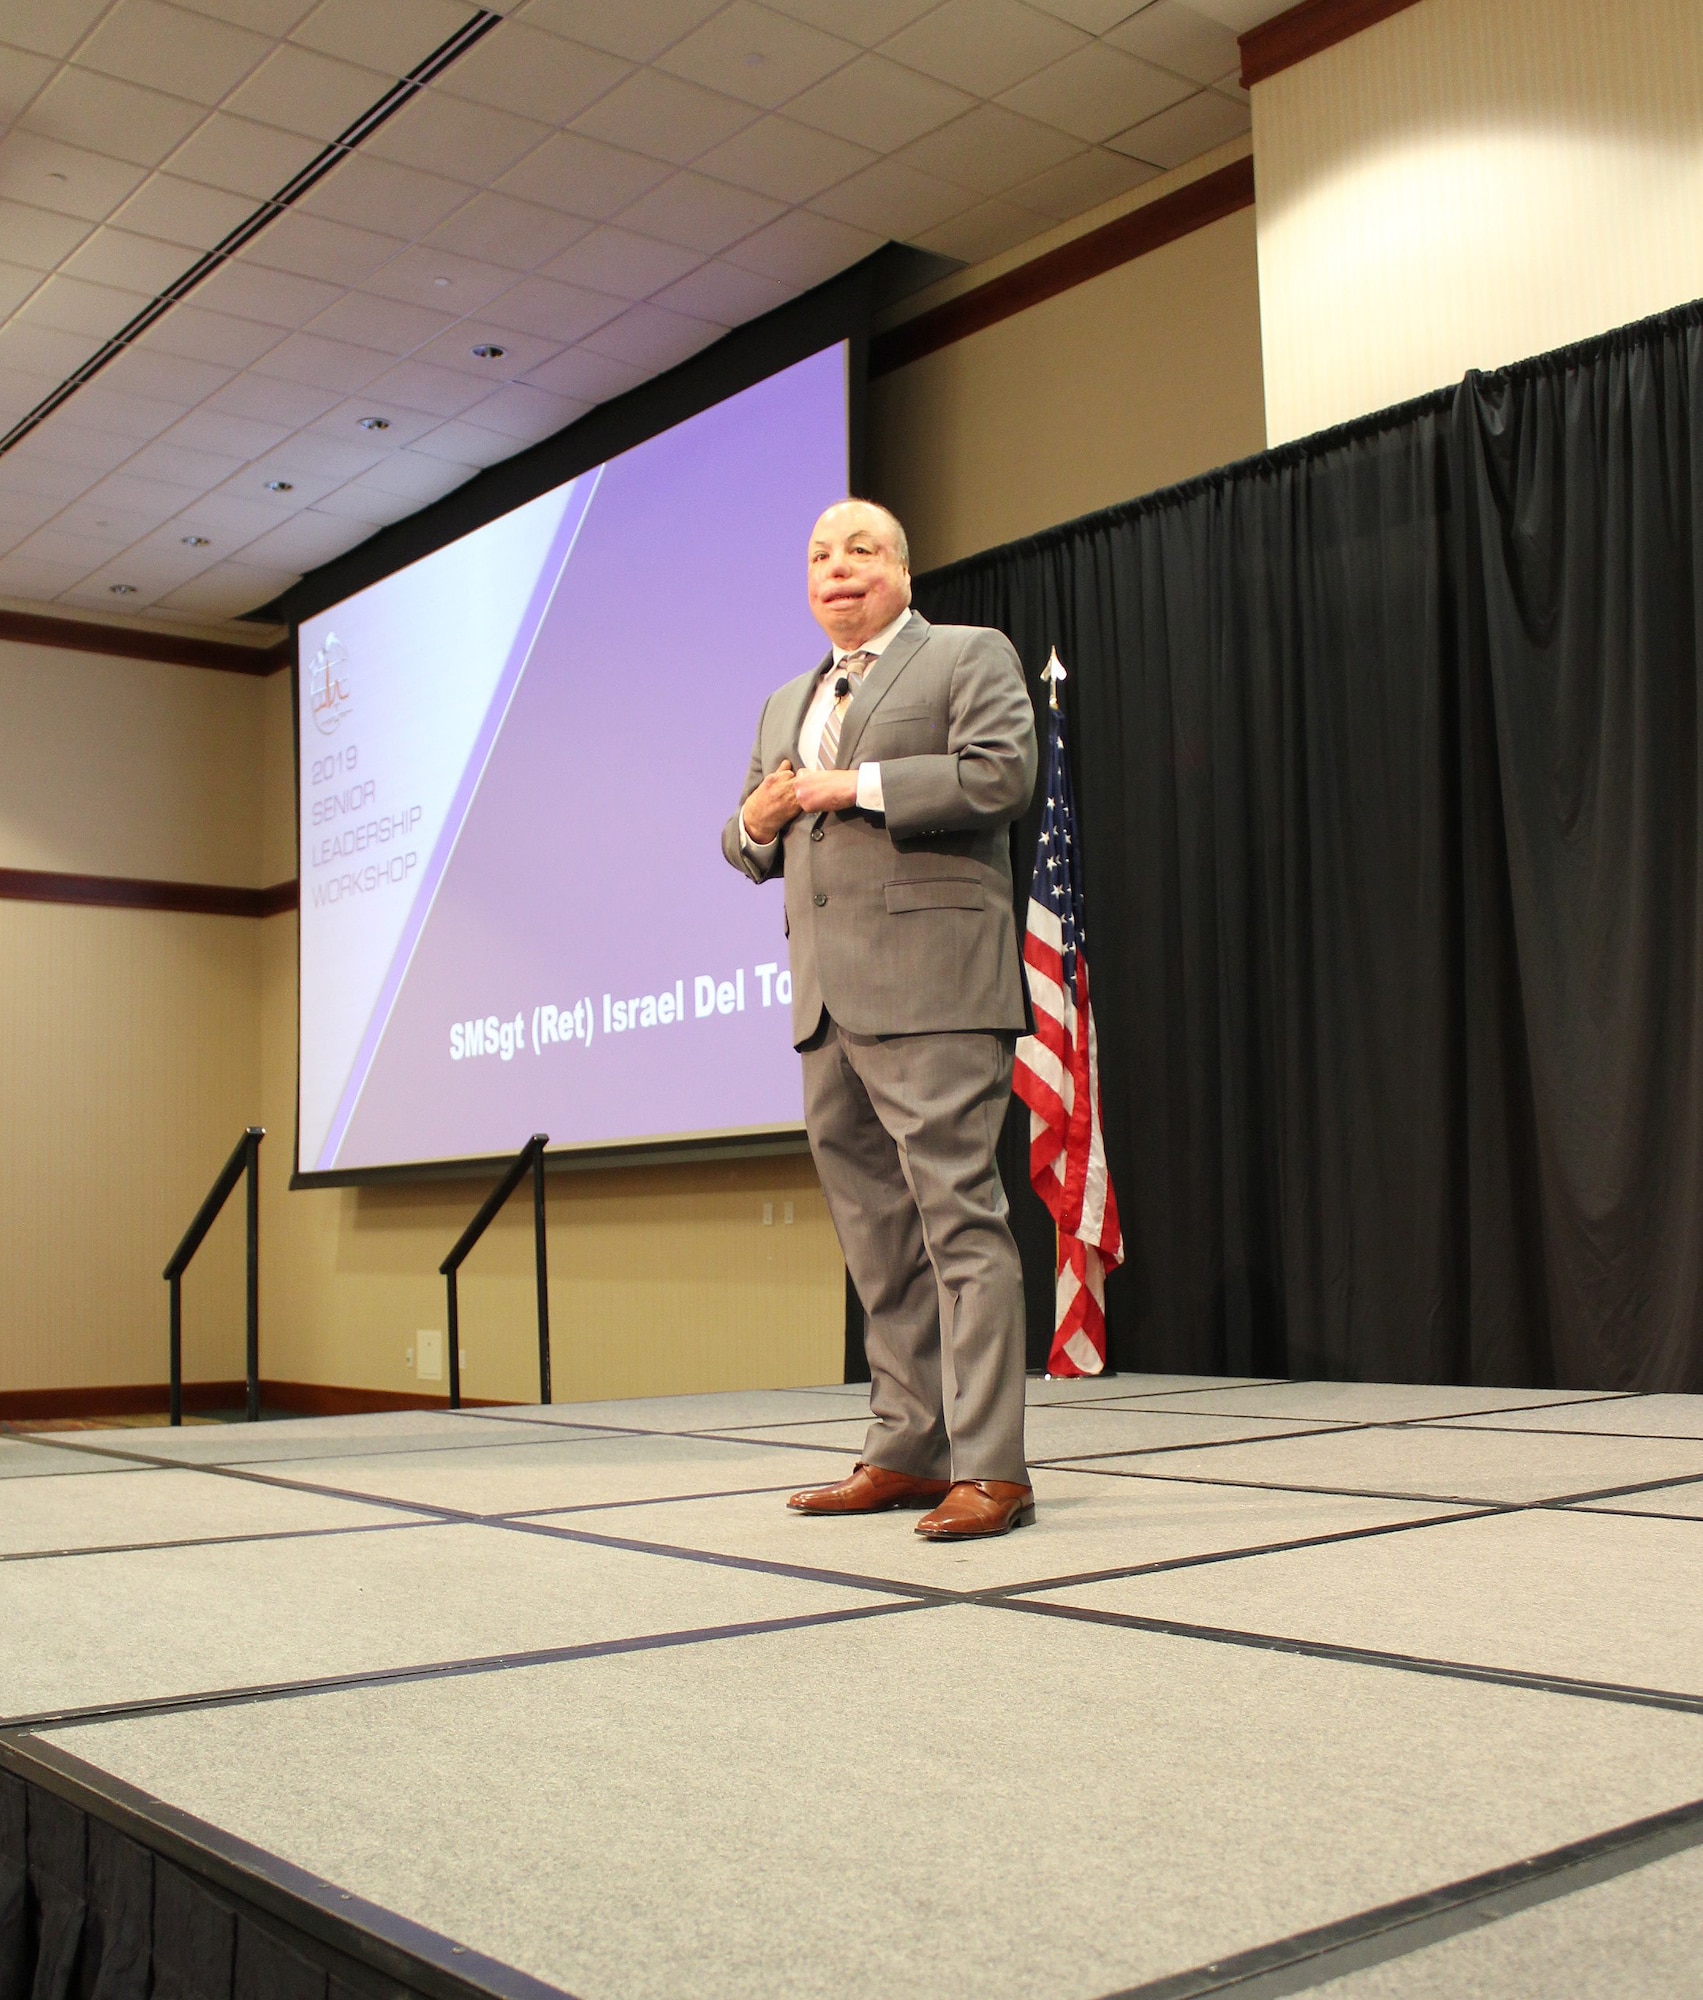 U.S. Air Force Senior Master Sgt. (Ret) Israel Del Toro speaks at the at the Air Force Medical Service 2019 Senior Leadership Workshop in Leesburg, Virginia, Dec. 4, 2019. Fourteen years ago, Del Toro was injured in a blast that caused third degree burns on 80% of his body. Del Toro shared how his burns made him stronger. “Every time I got knocked down, I didn’t get up on my own. I had teammates who were there to help me back up,” said Del Toro. (U.S. Air Force photo by Josh Mahler)